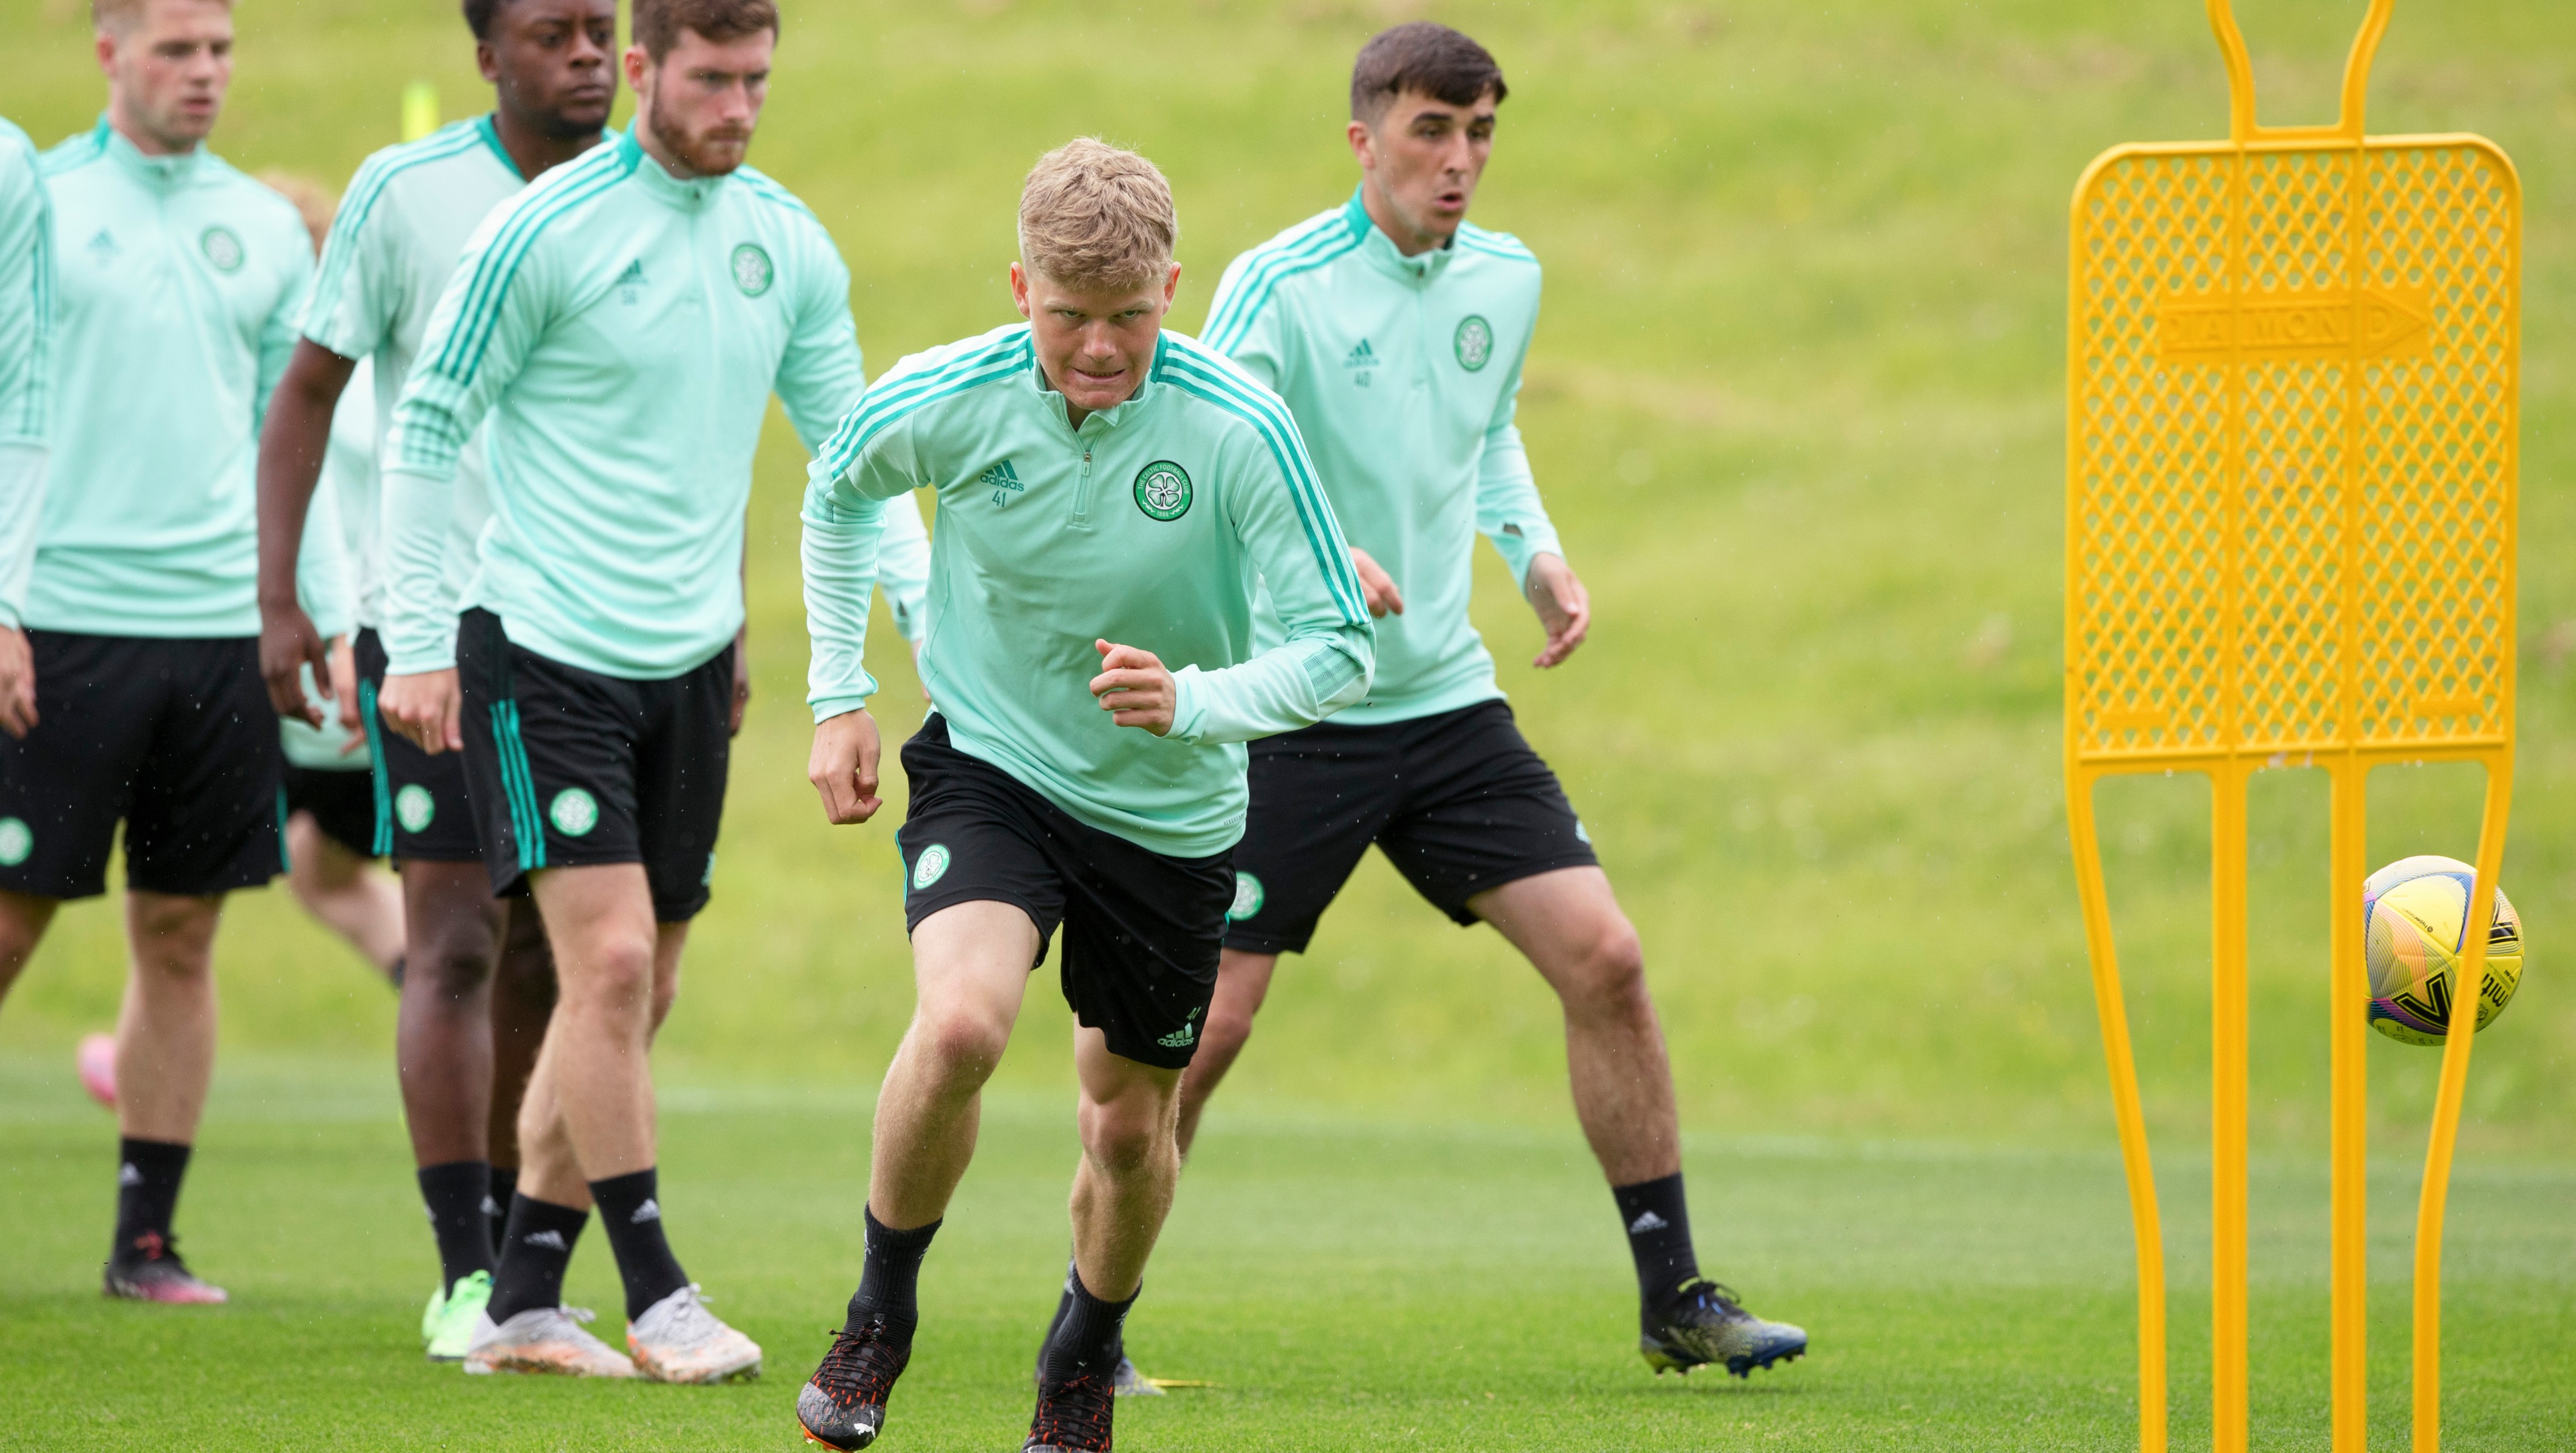 Scott Robertson during a Celtic training session at Lennoxtown on 24 June, 2021, in Glasgow, Scotland. (Photo by Craig Williamson / SNS Group)